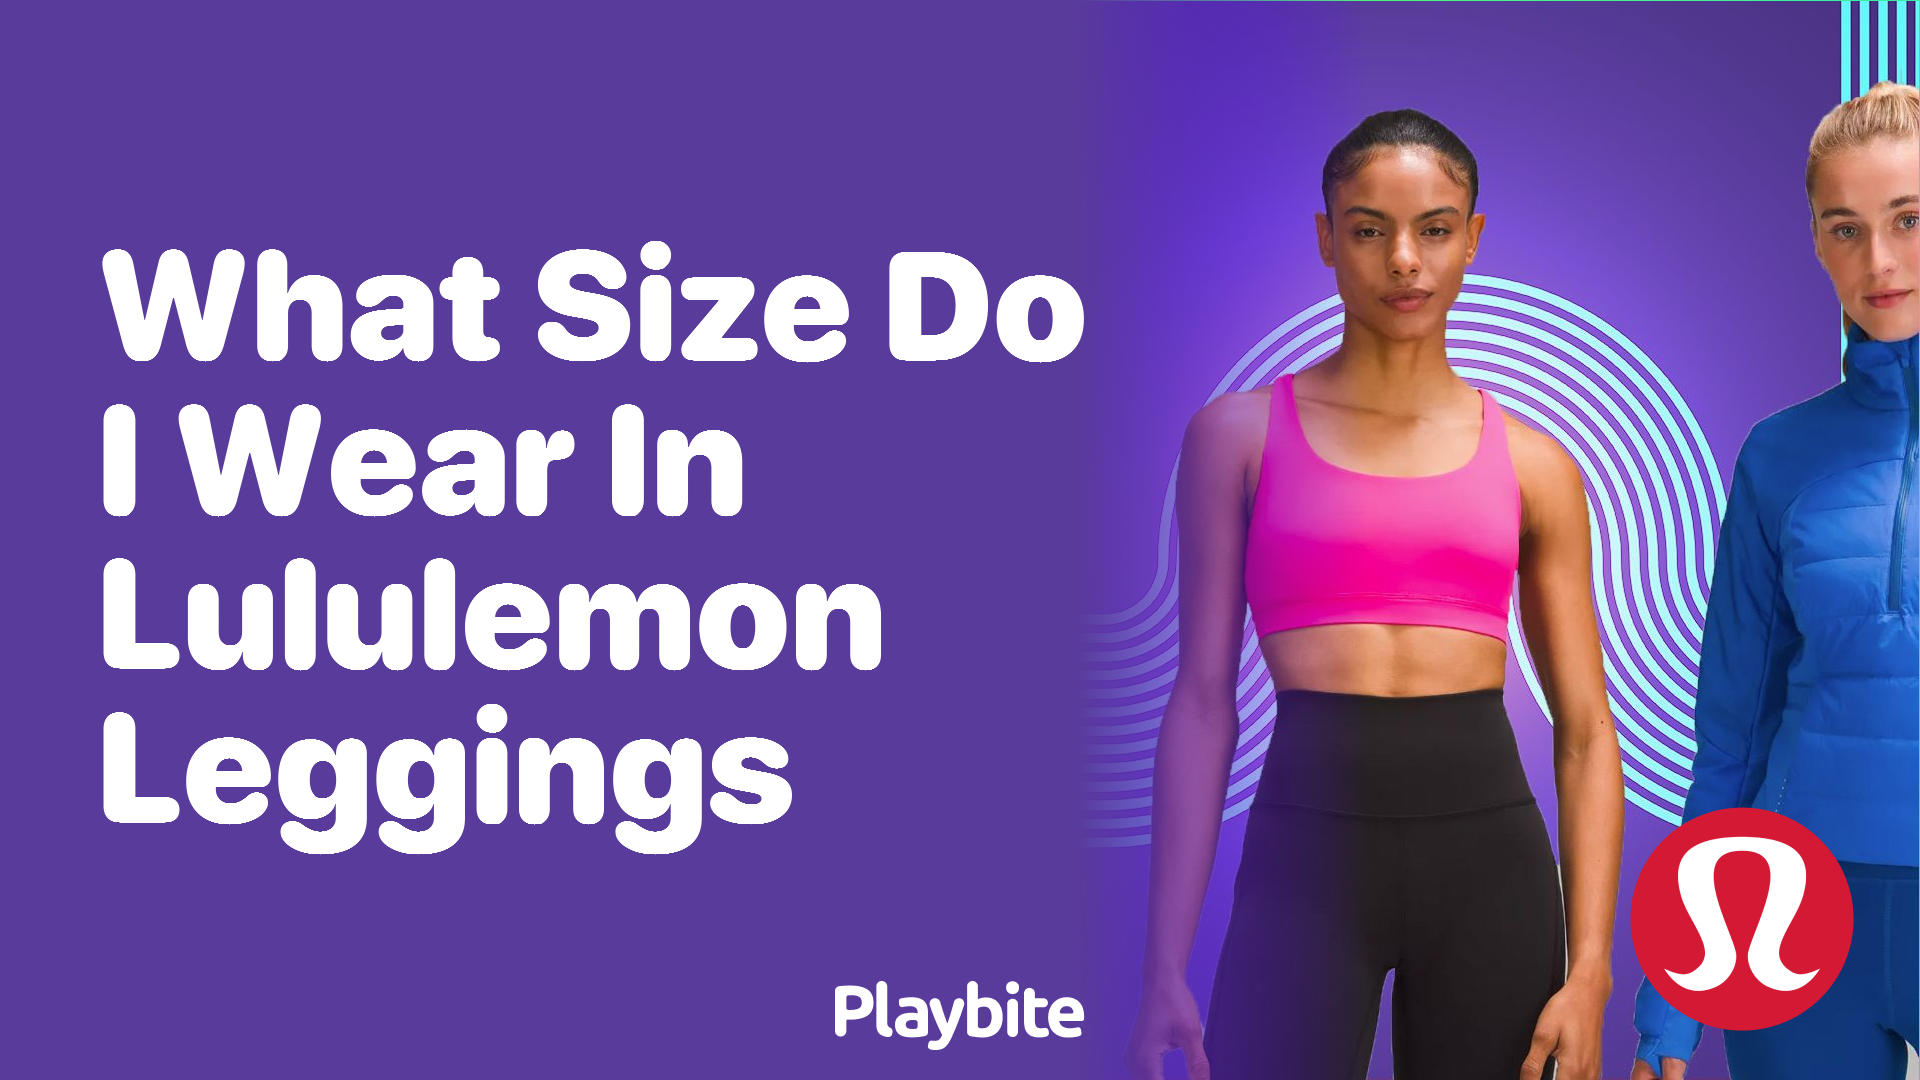 What Size Do I Wear in Lululemon Leggings? Find Out Here! - Playbite